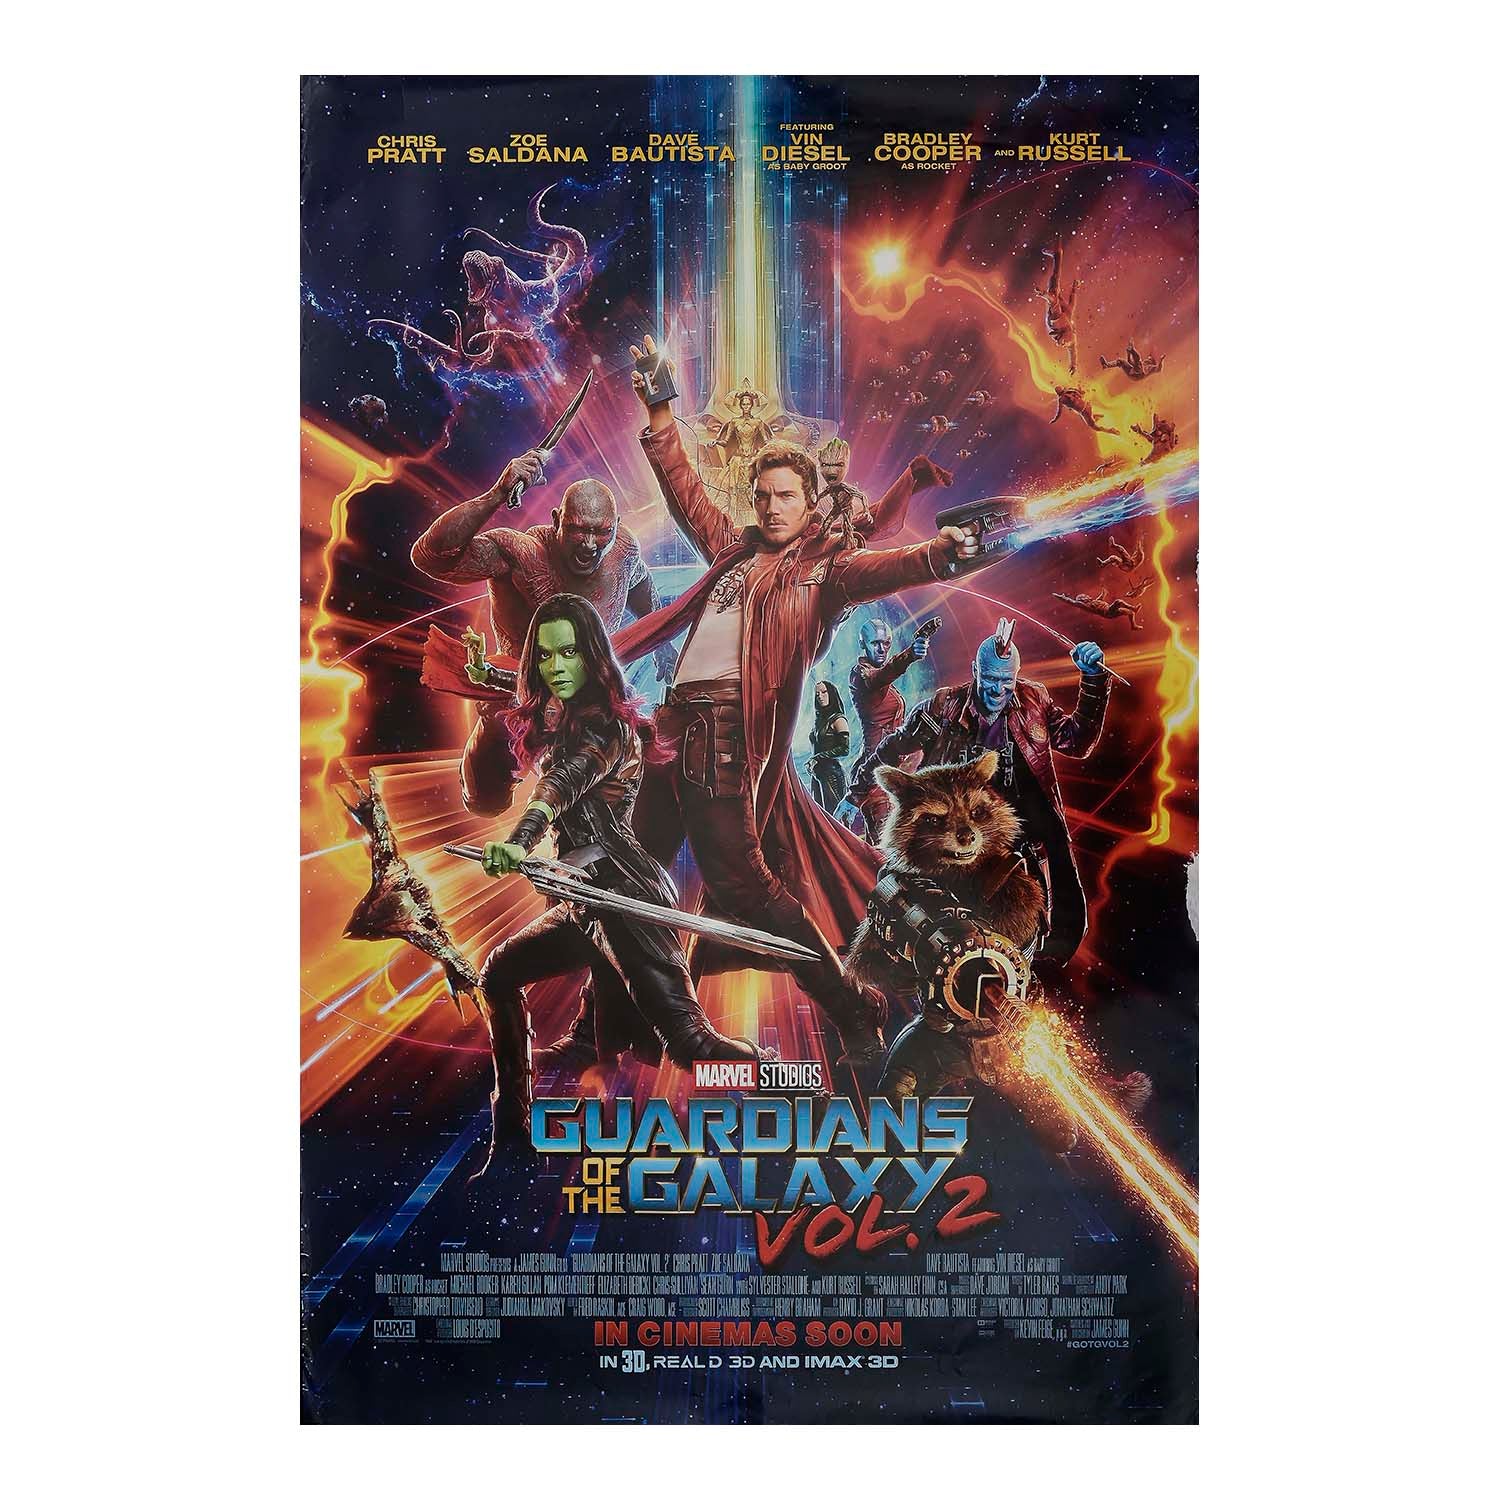 Original, large format, back-lit film poster for the release of Guardians of the Galaxy Vol. 2, IMAX, 2017. The poster was produced for display at IMAX cinemas and features artwork of the leading cast members